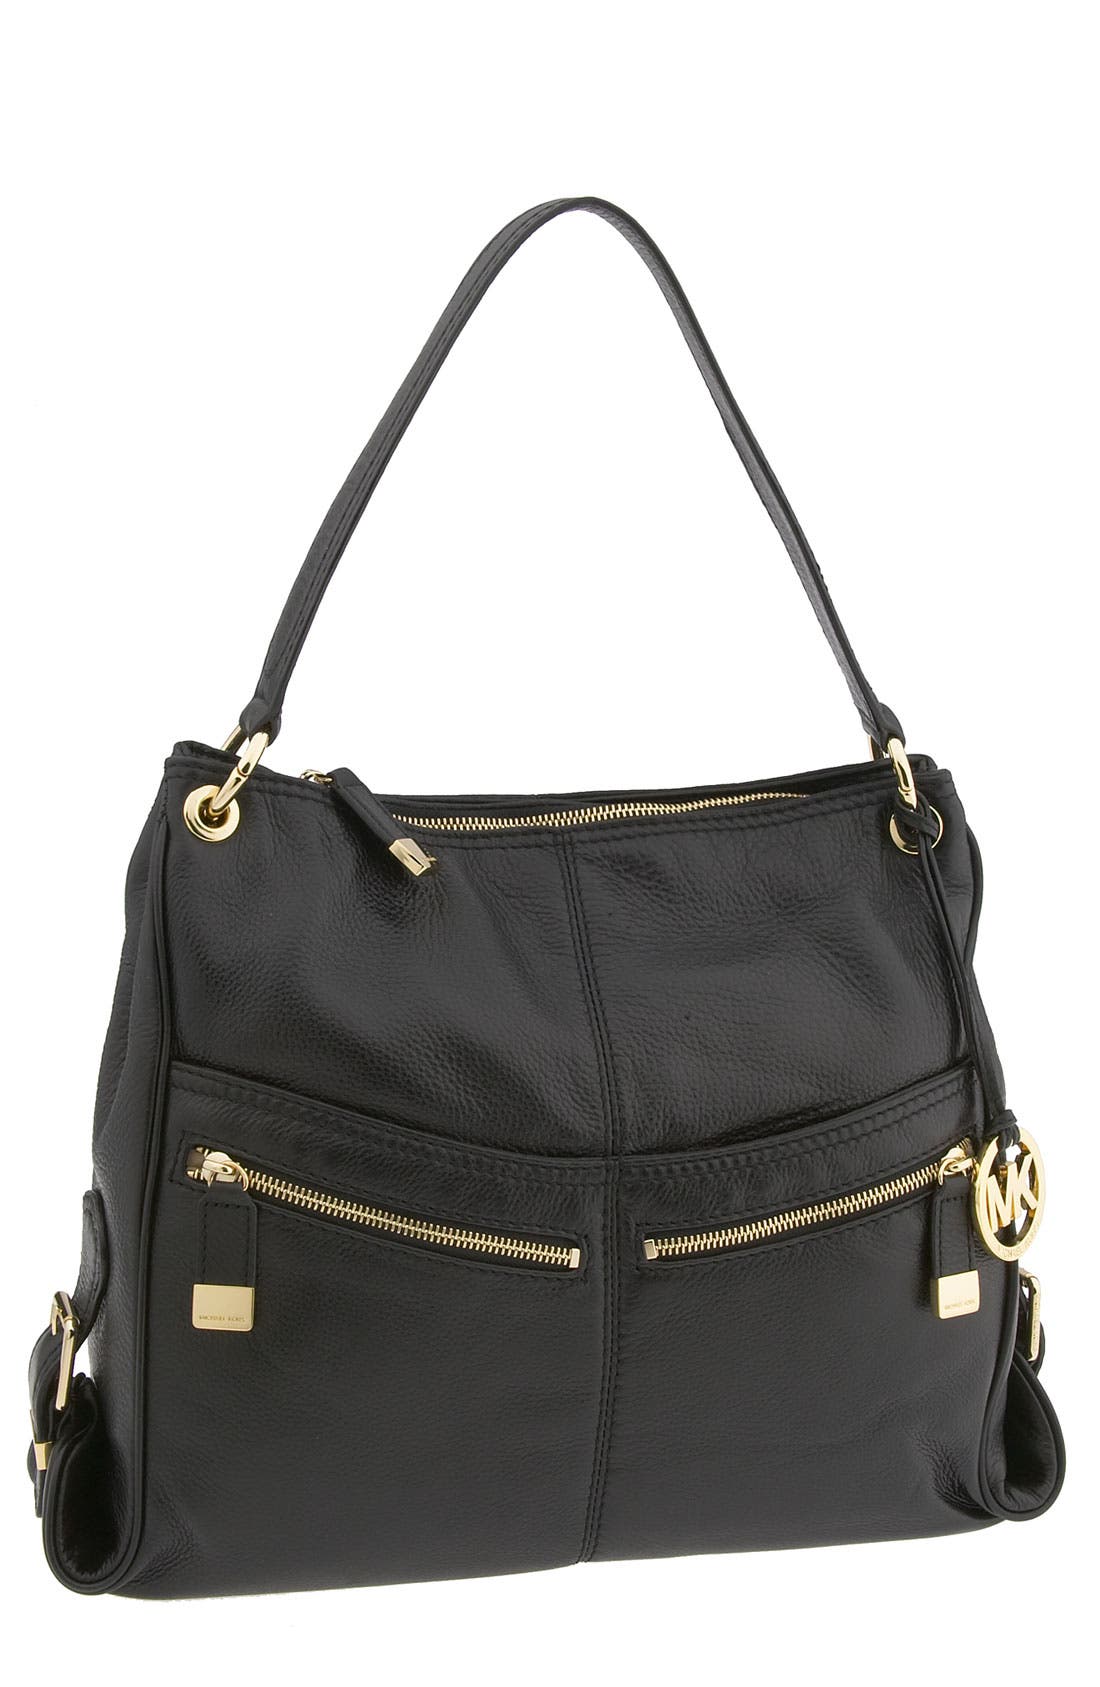 michael kors bag with zippers on front